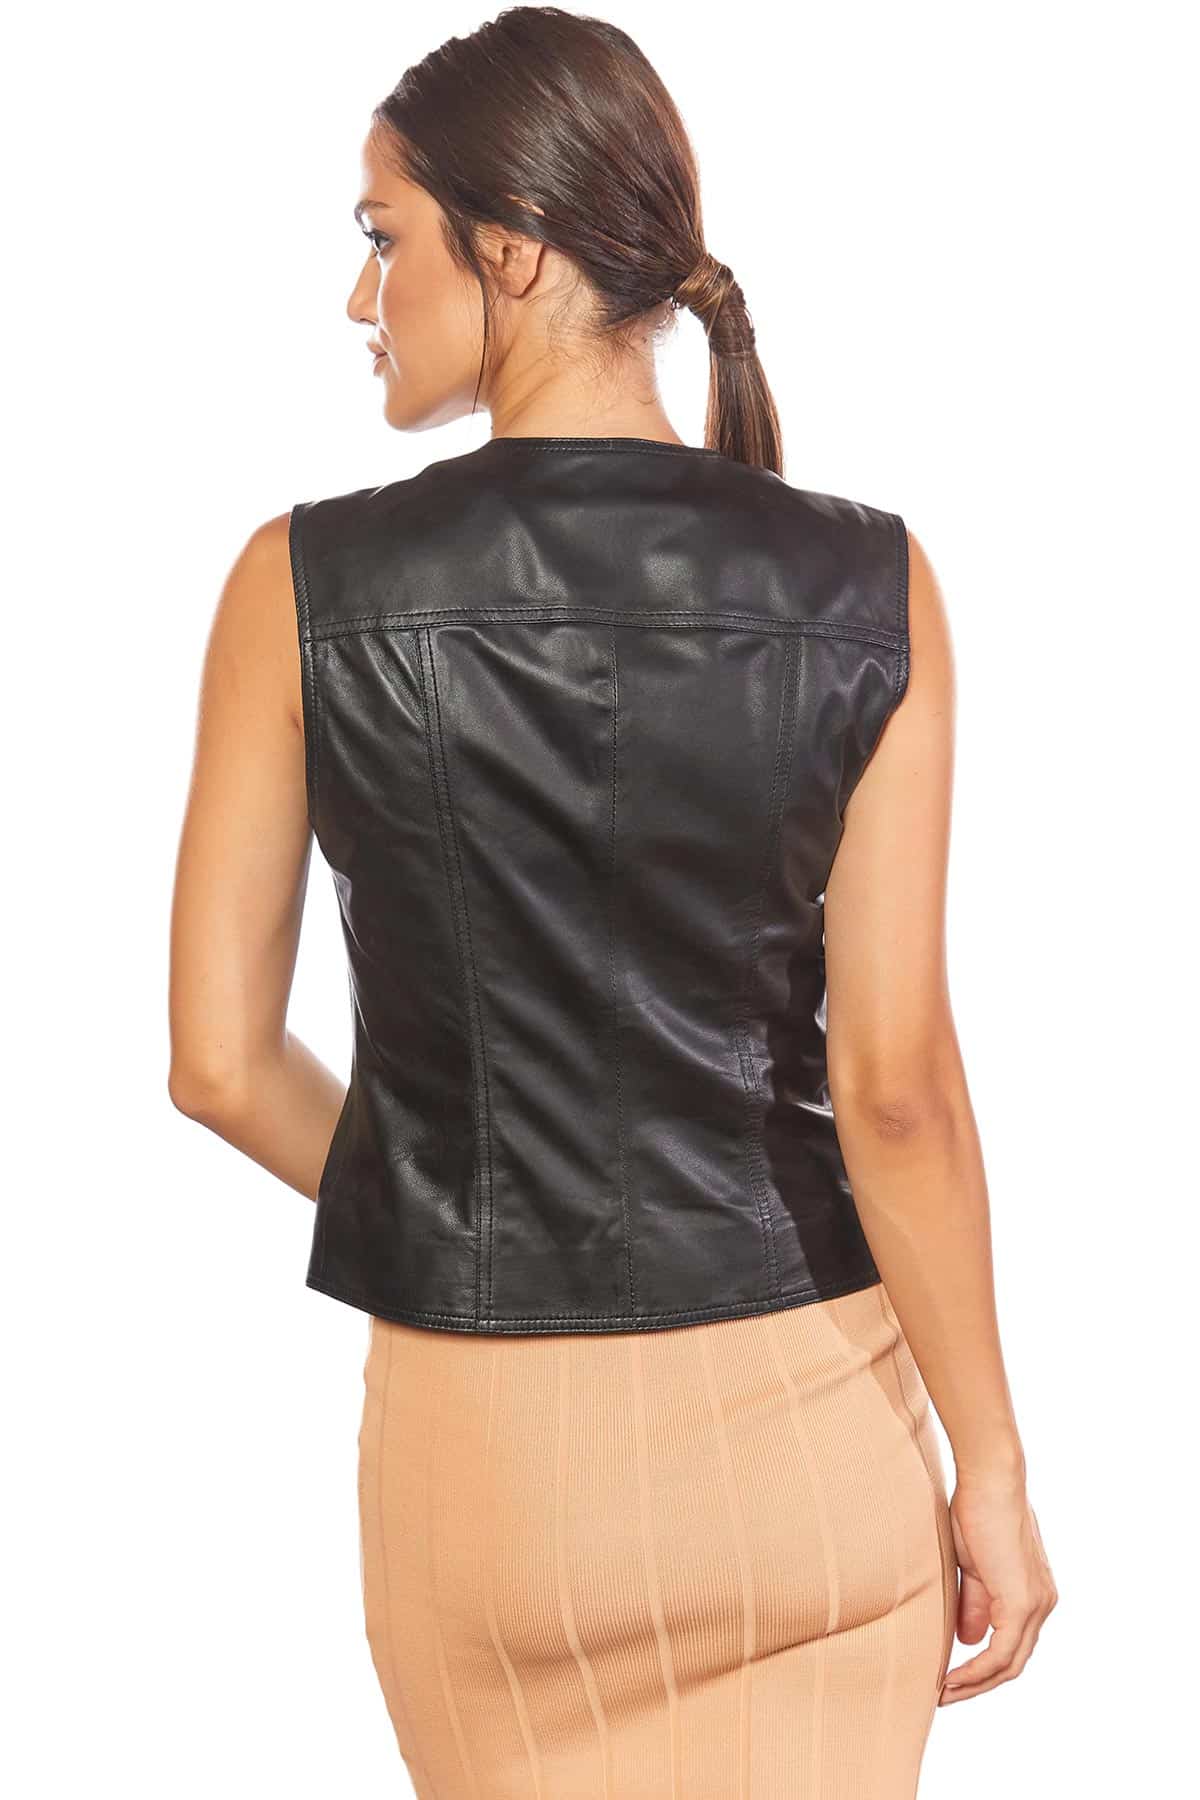 Black Real Leather Vest Woman Ruffles Sleeveless Real Leather Gilet Jacket  Tops